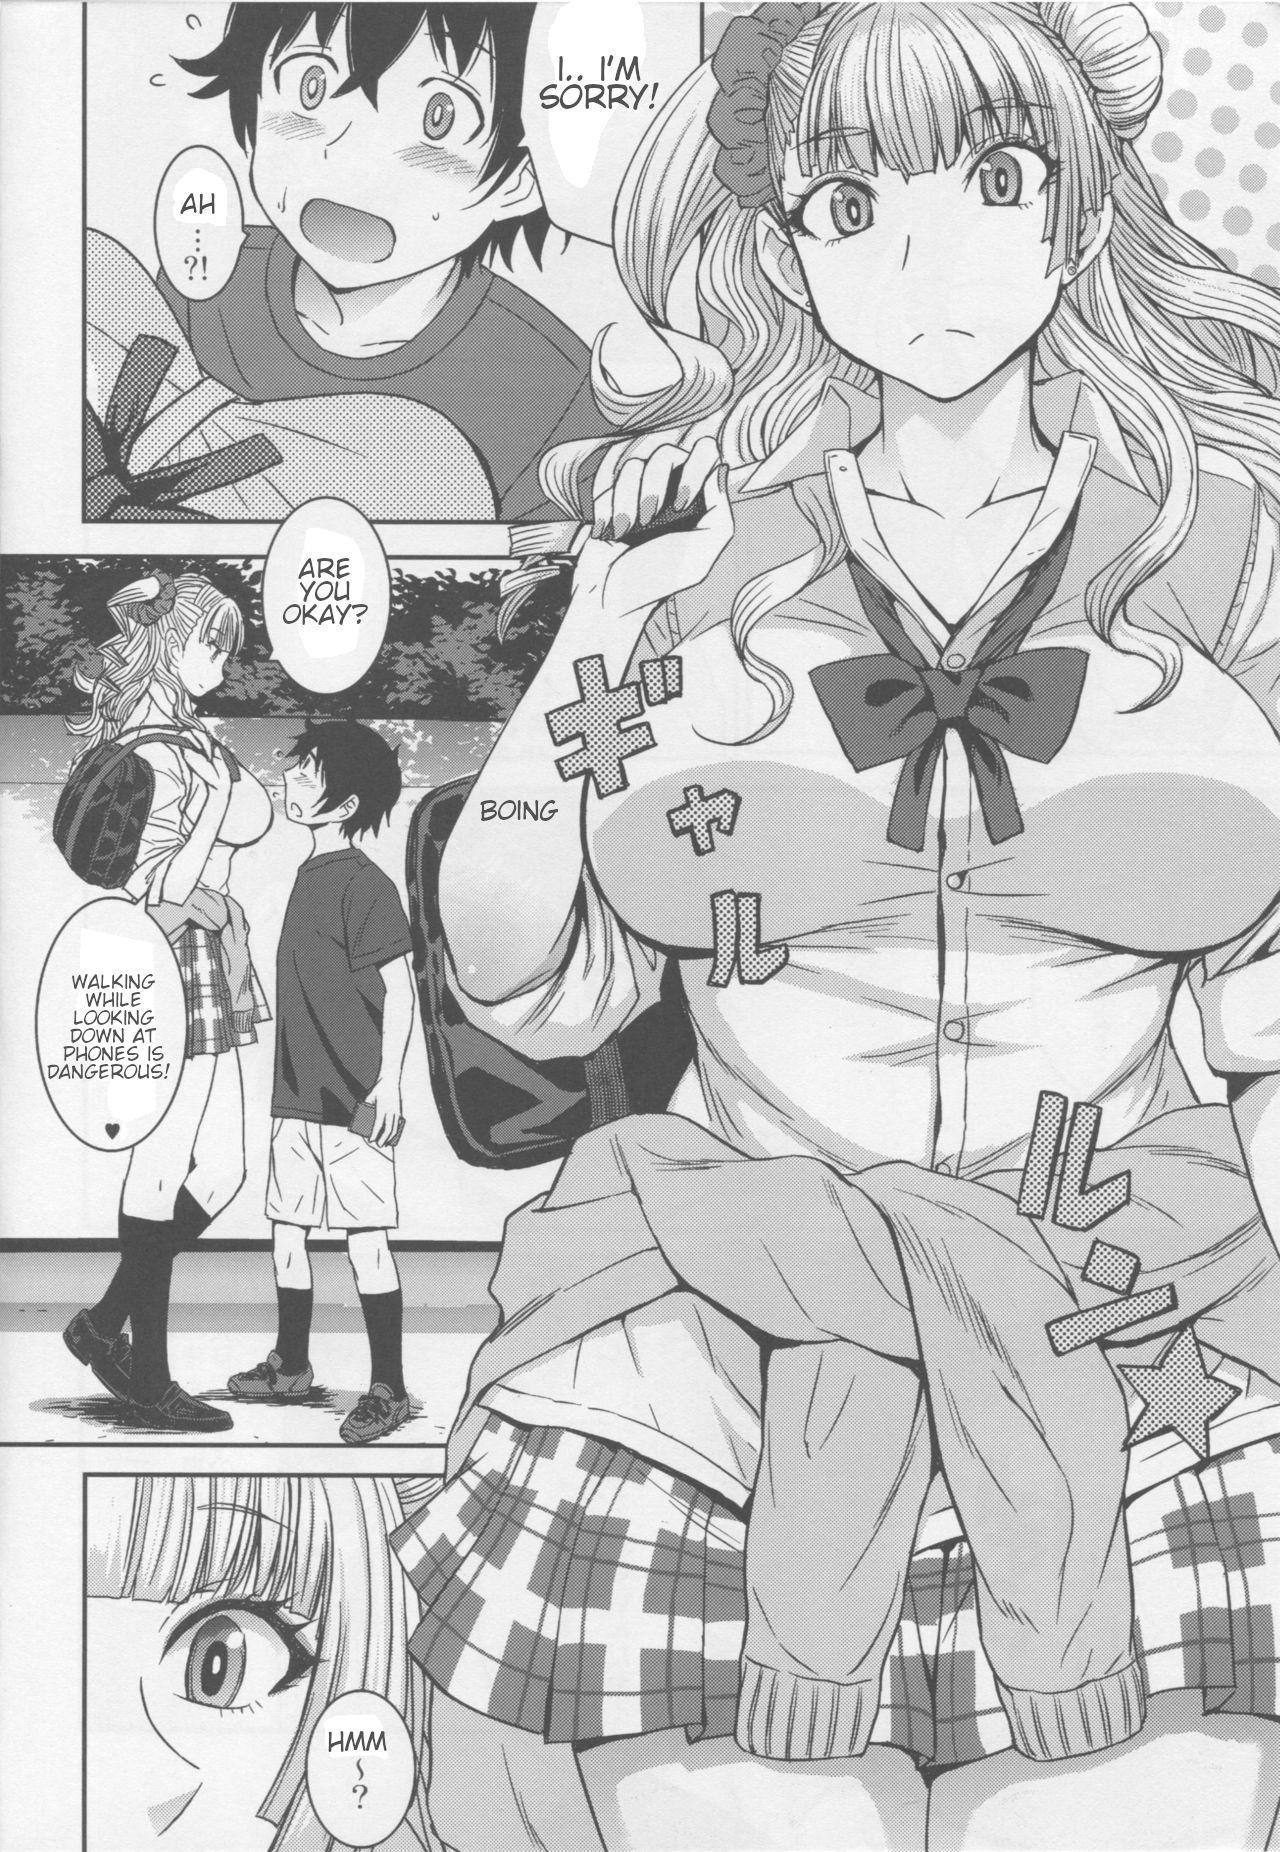 Parties Boy Meets Gal - Oshiete galko chan  - Page 3